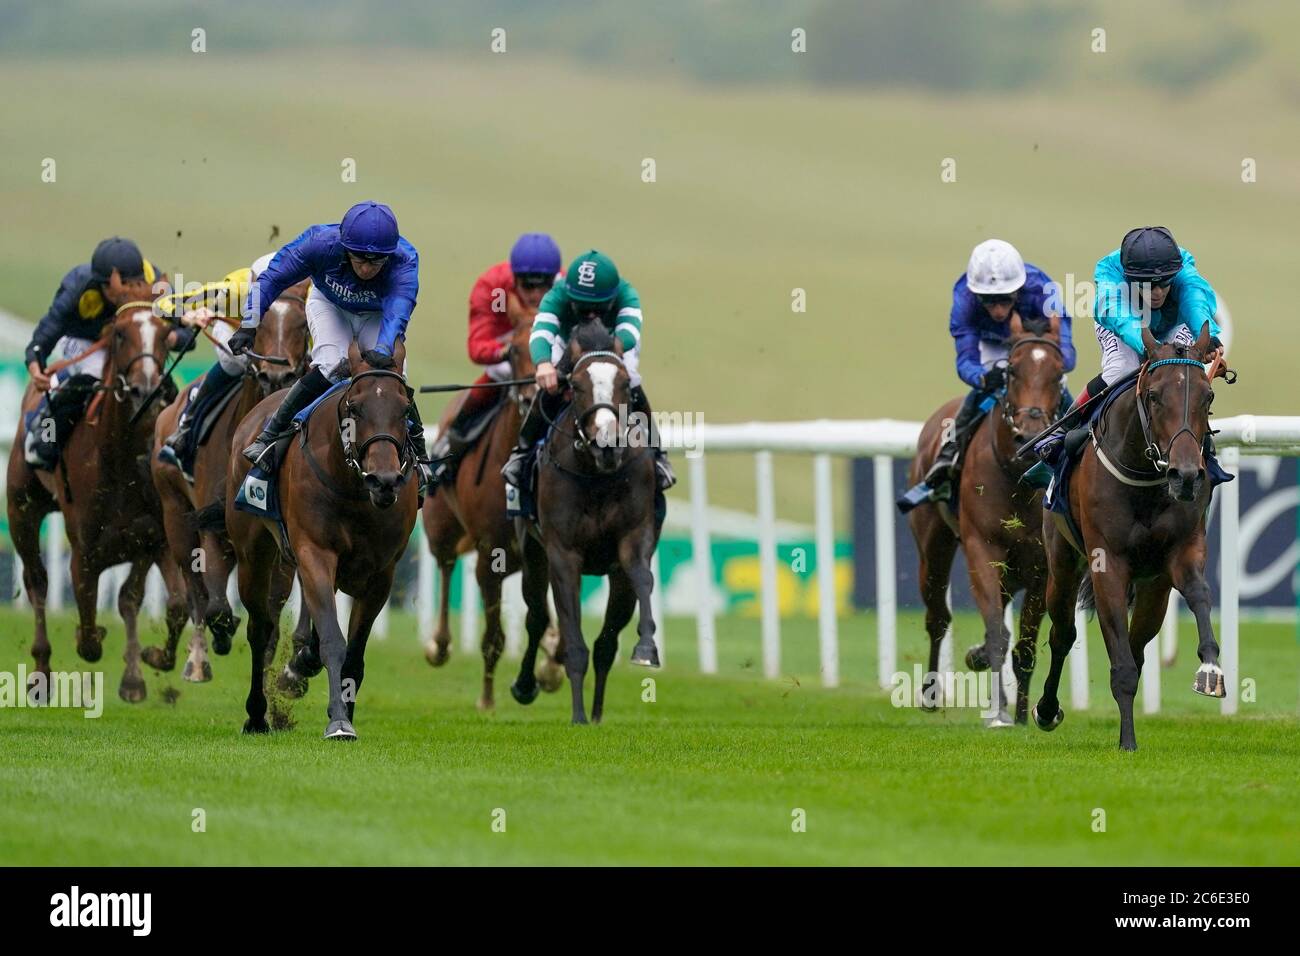 She's So Nice ridden by Ben Curtis (right) wins the British Stallion Studs EBF Maiden Fillies' Stakes (Plus 10/GBB Race) during day one of The Moet and Chandon July Festival at Newmarket Racecourse. Stock Photo